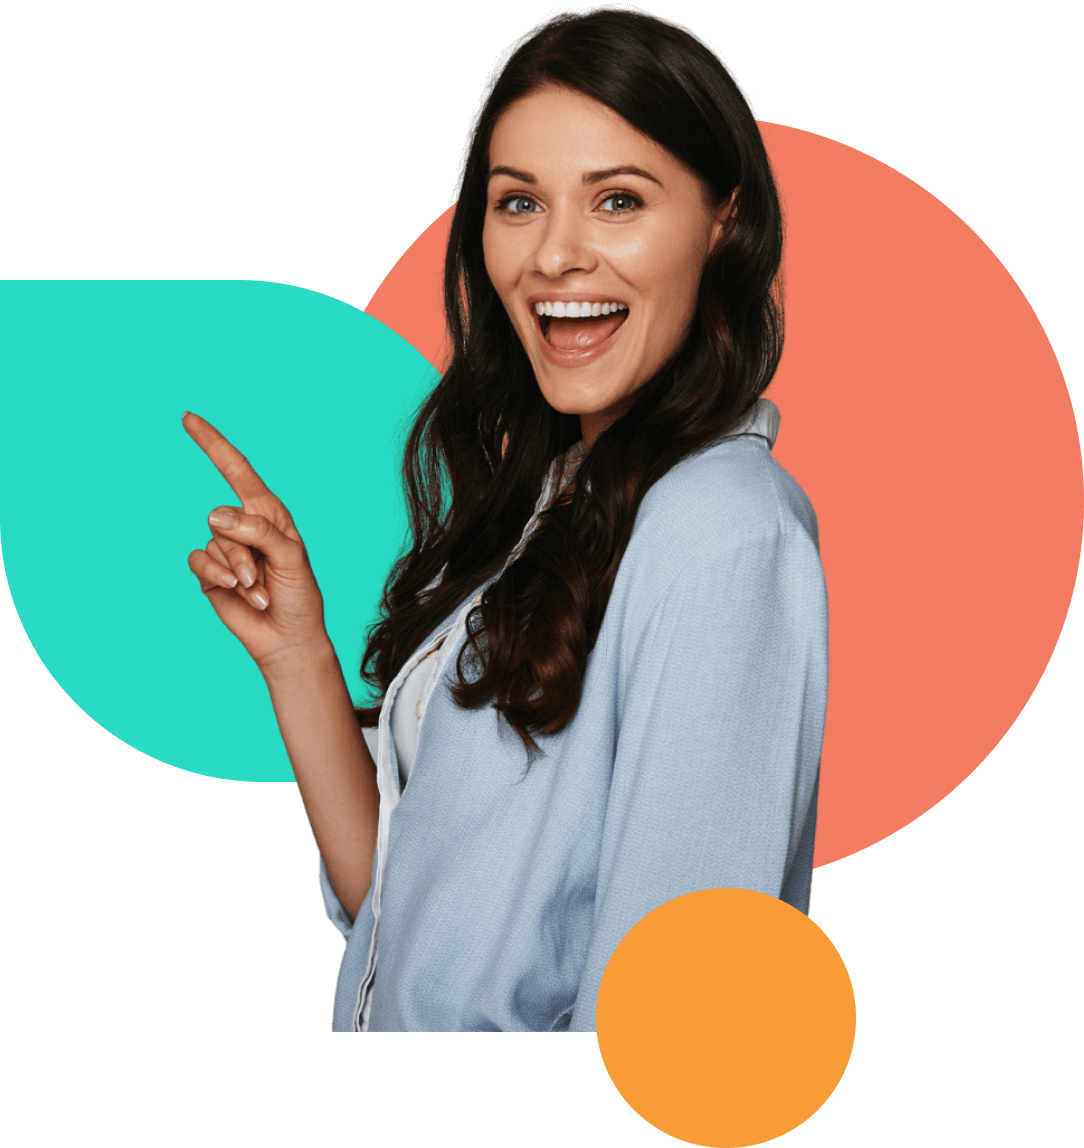 Smiling woman pointing against teal and orange shapes on transparent background